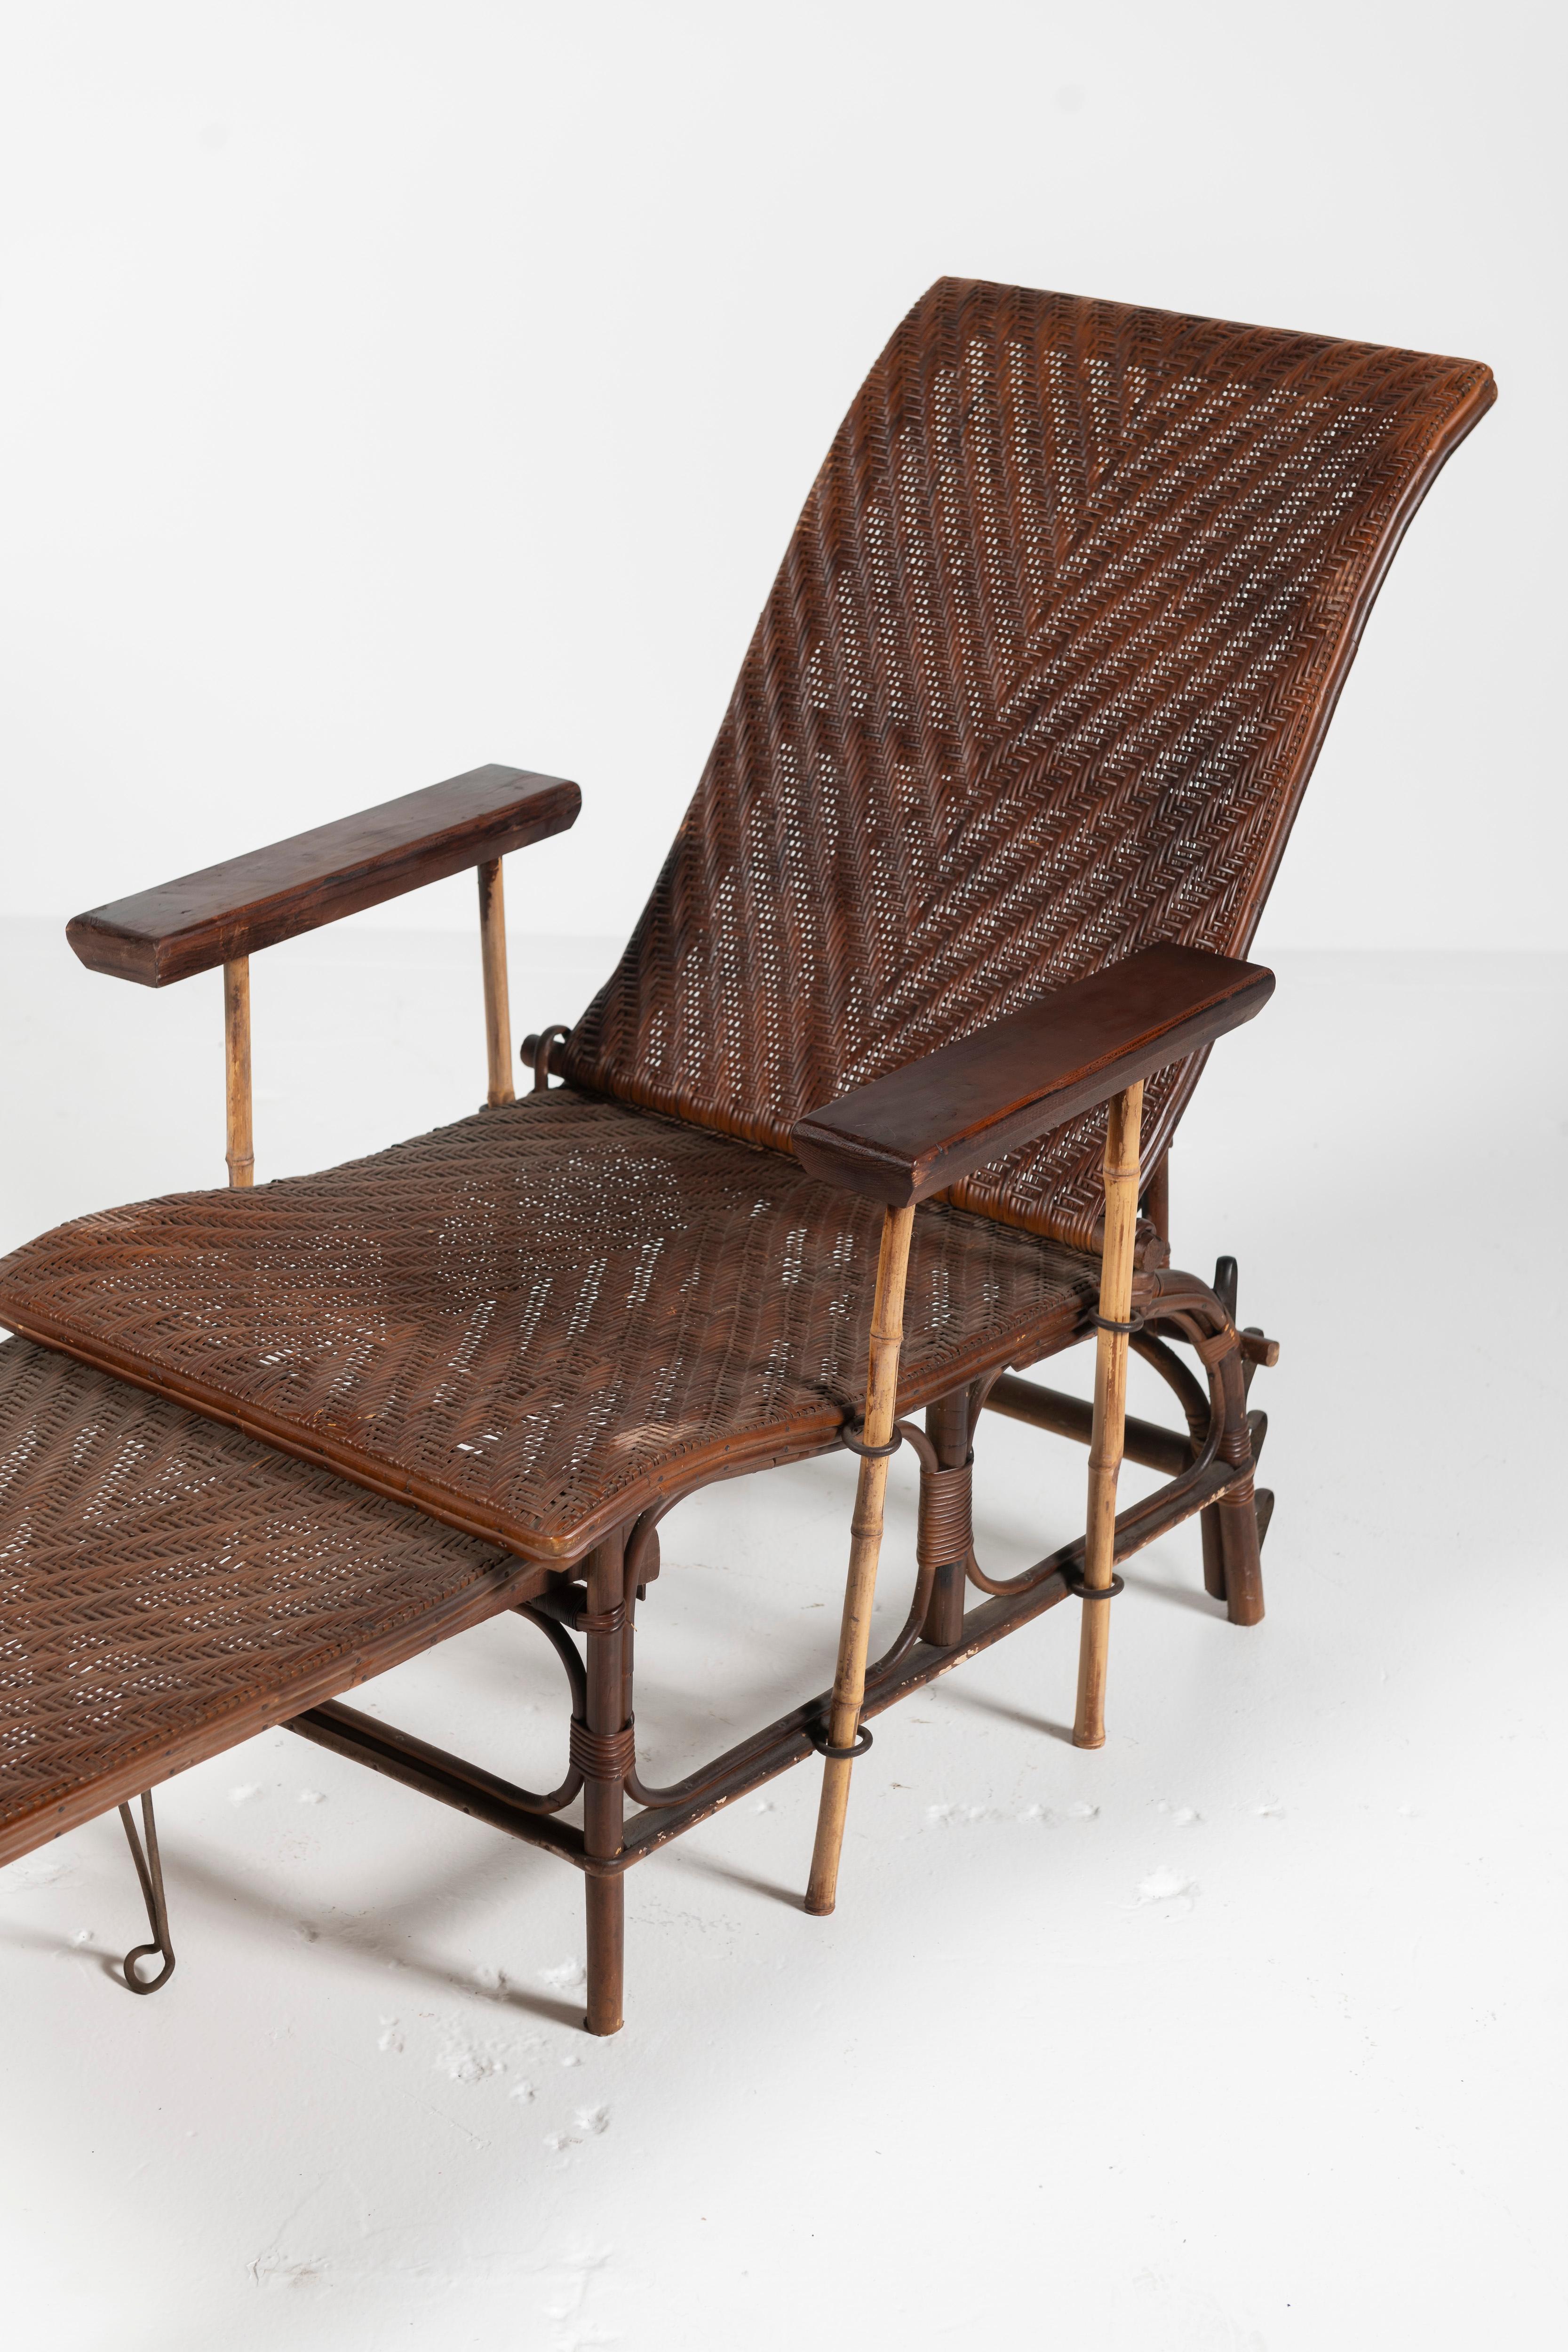 Classic French Wicker and Bamboo Chaise Lounge woven in a chevron pattern in brown. The chair converts to a lounge by extending the ottoman and the back is both curved and adjustable to recline at several angles for comfort and relaxation. The arms